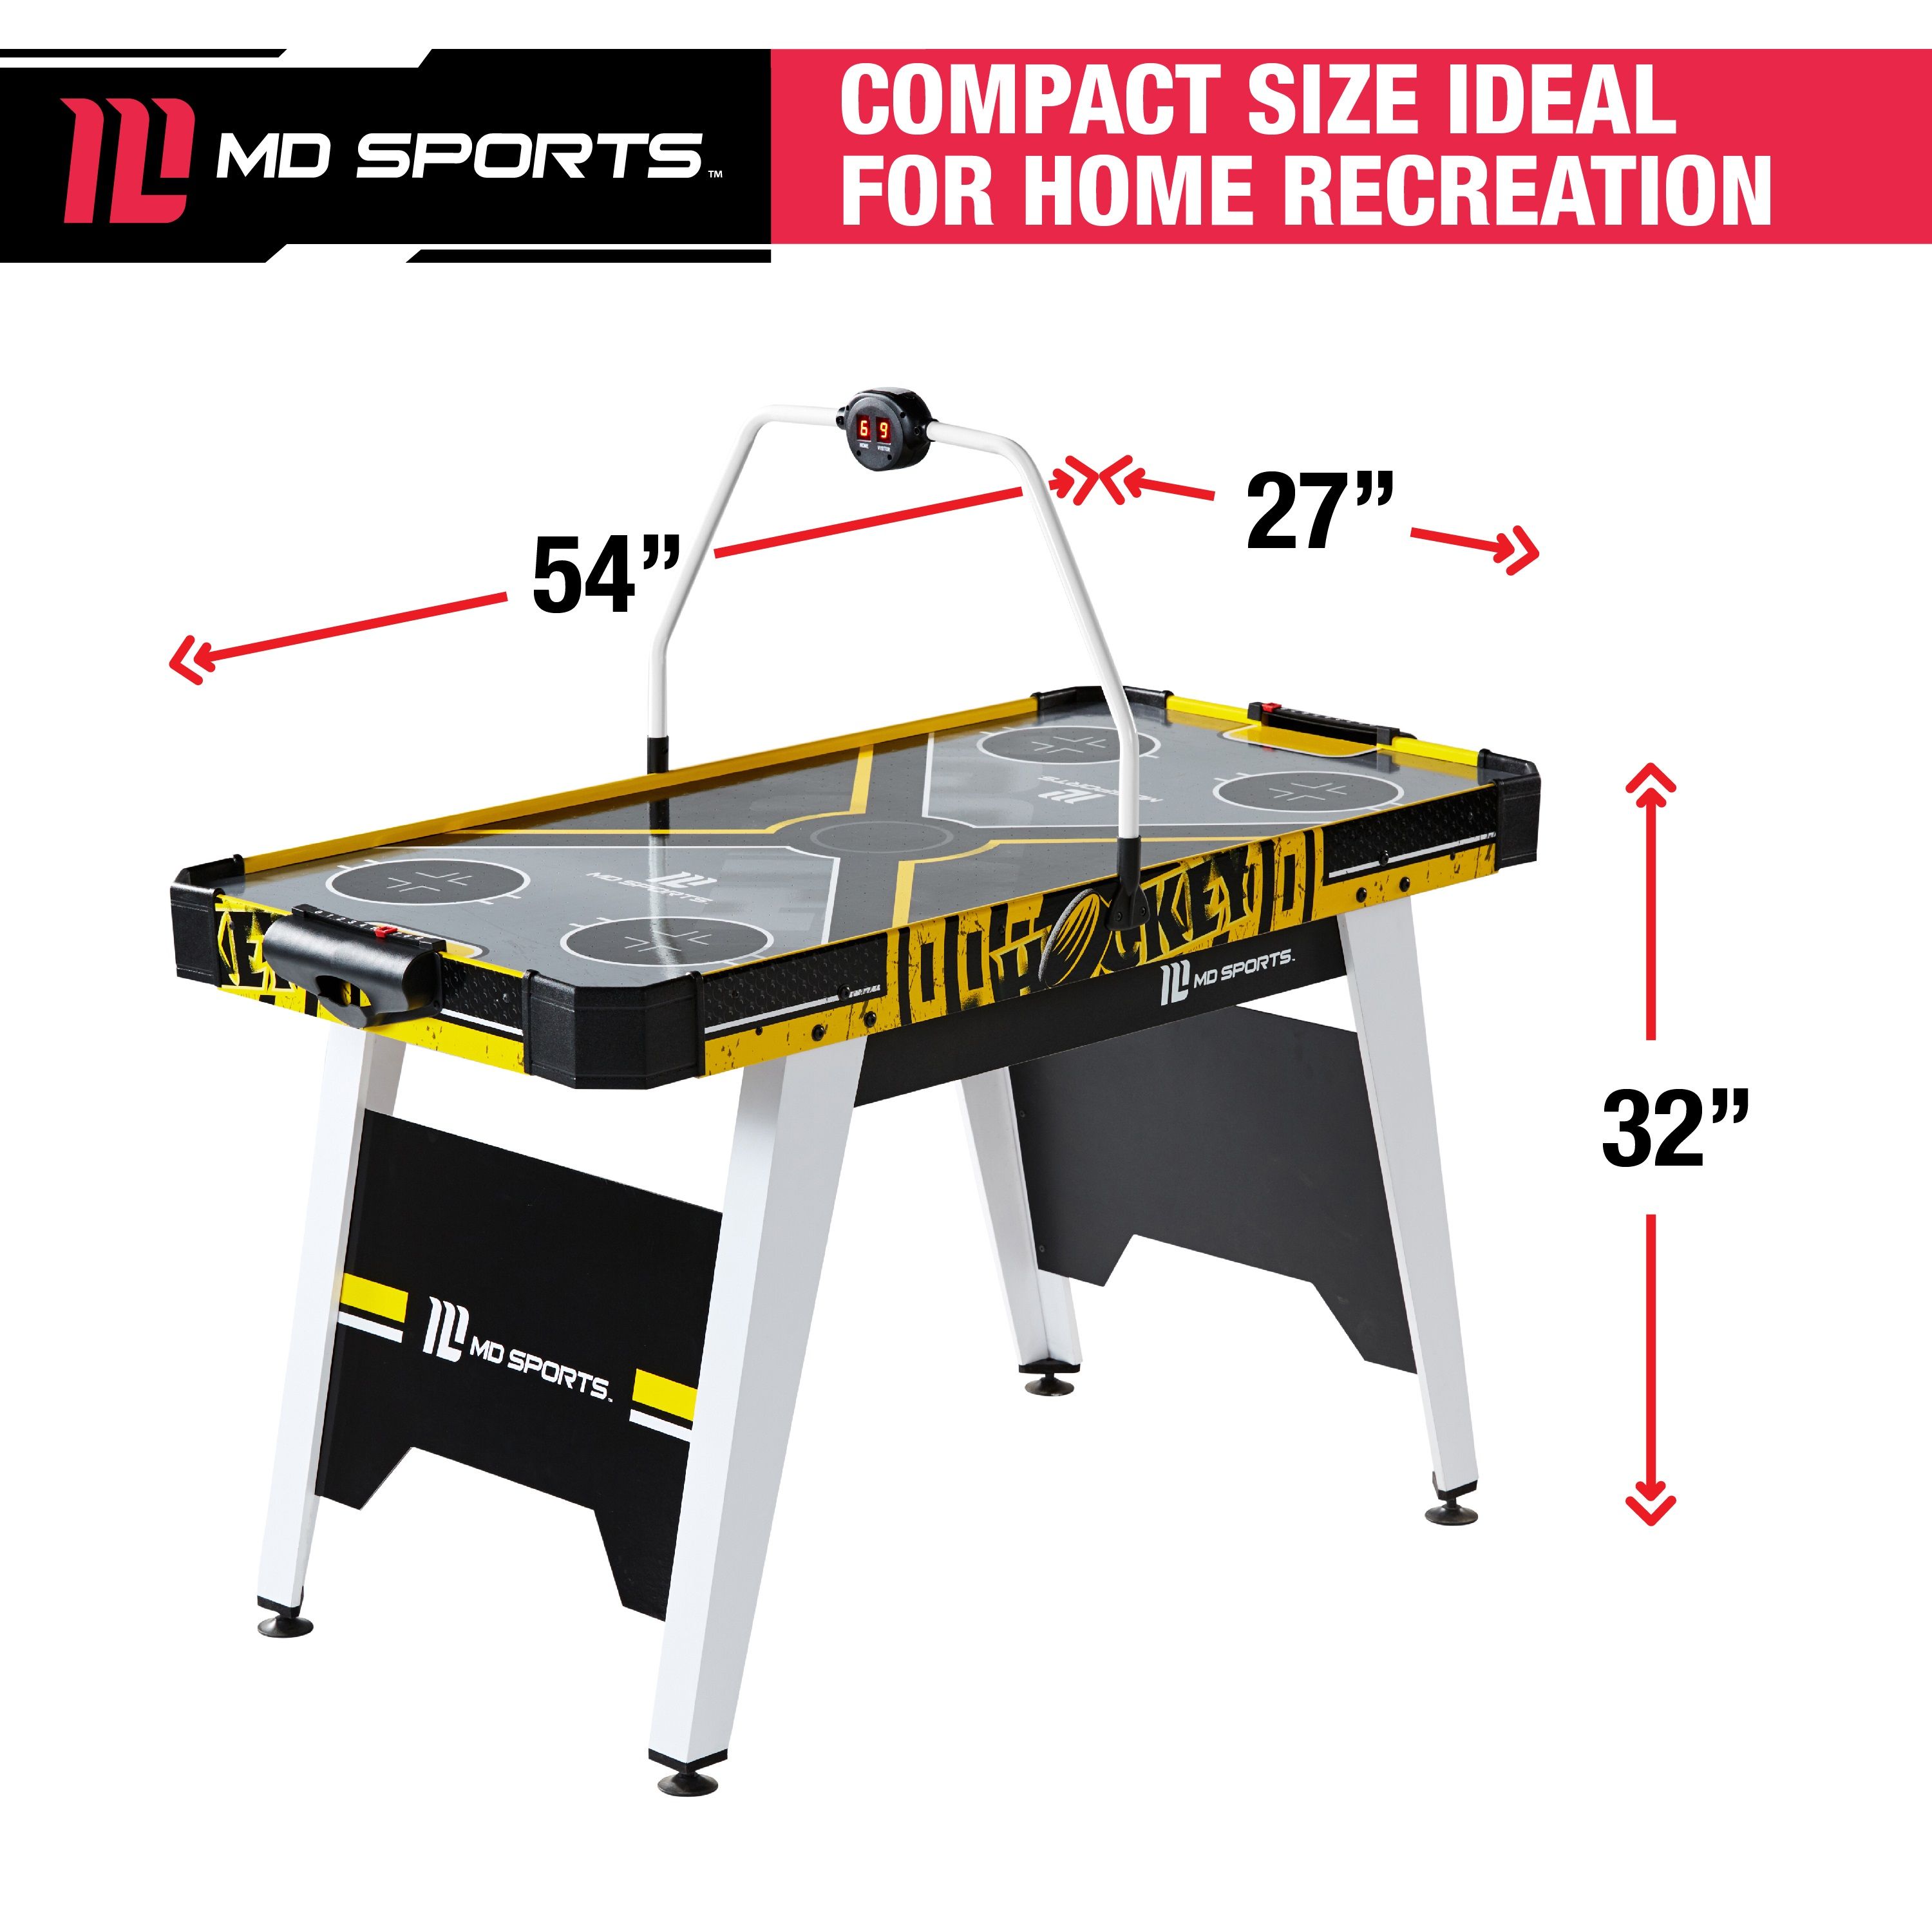 MD Sports Air Hockey Game Table, Overhead Electronic Scorer, Black/Yellow, 54" x 27" x 32" - image 4 of 10